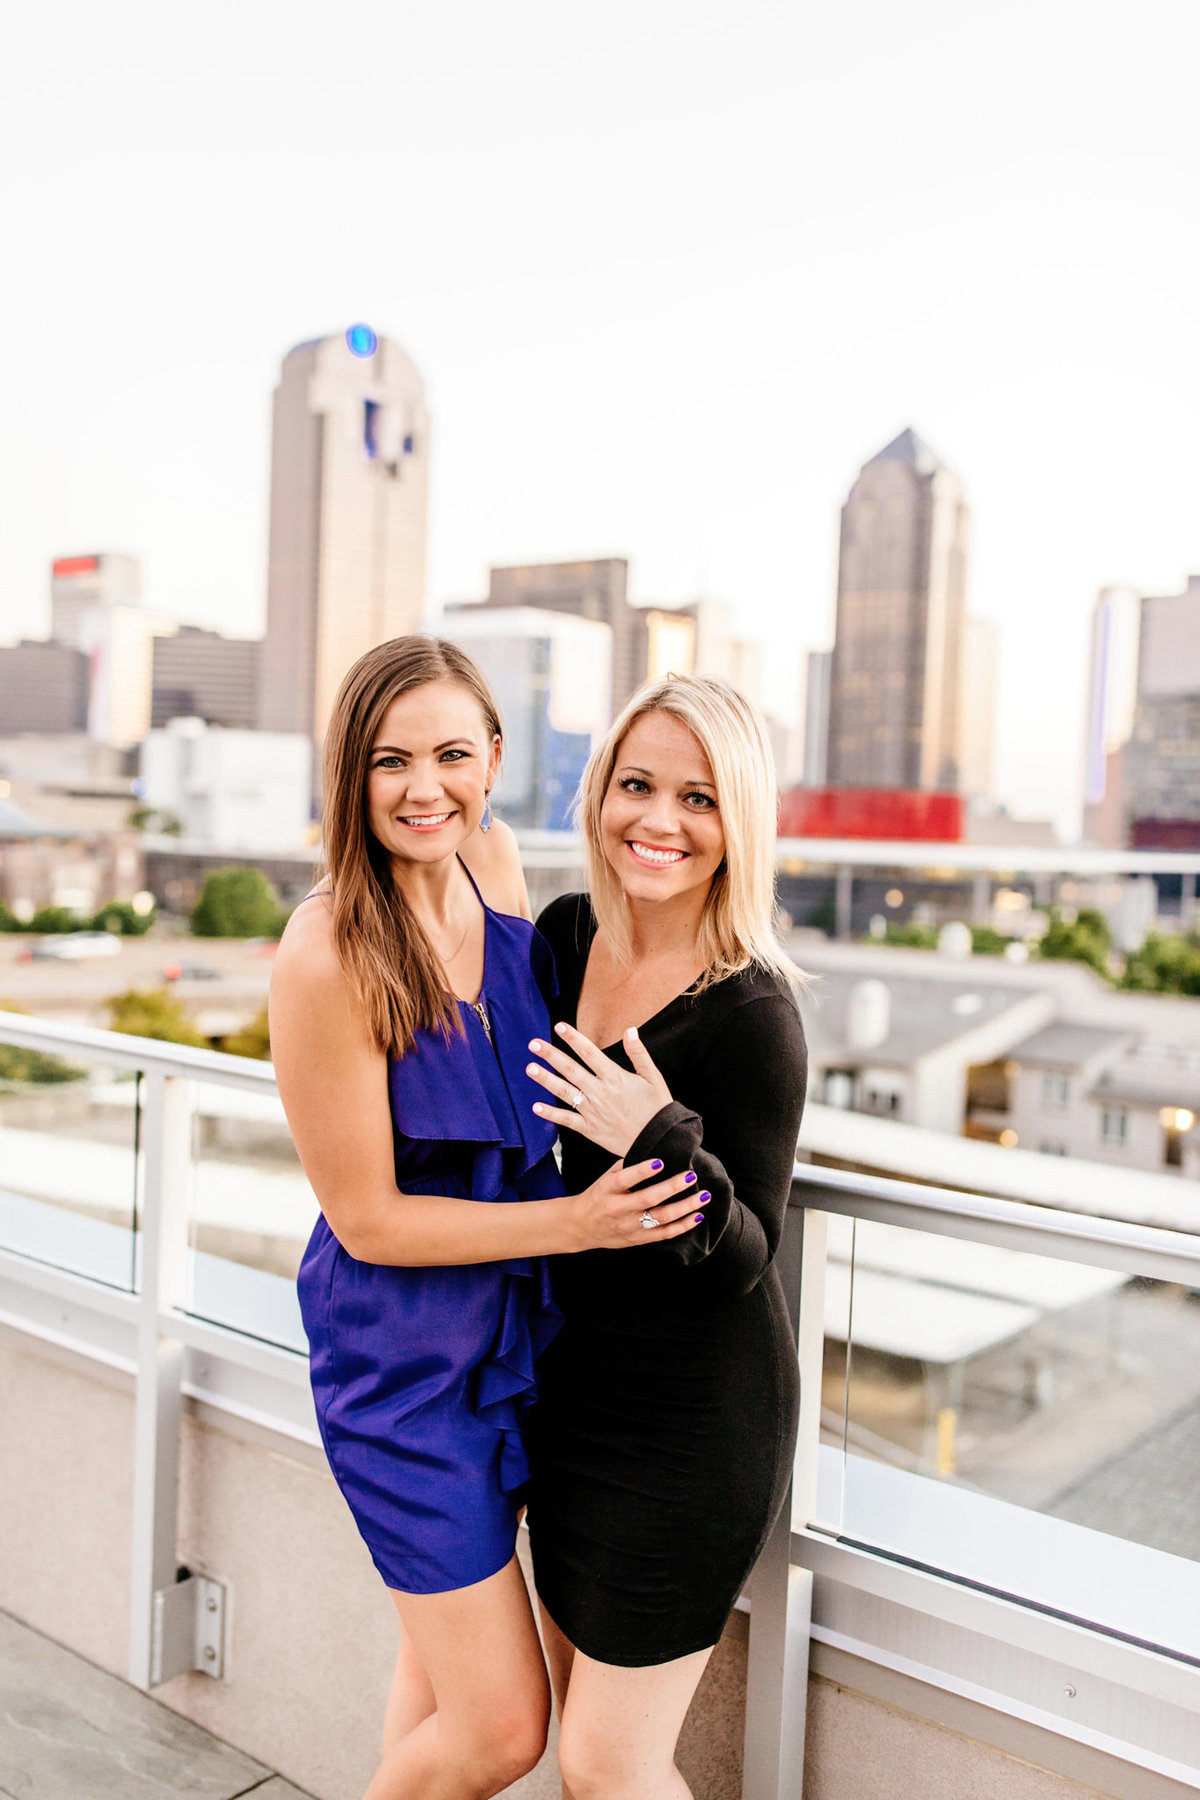 Eric & Megan - Downtown Dallas Rooftop Proposal & Engagement Session-233